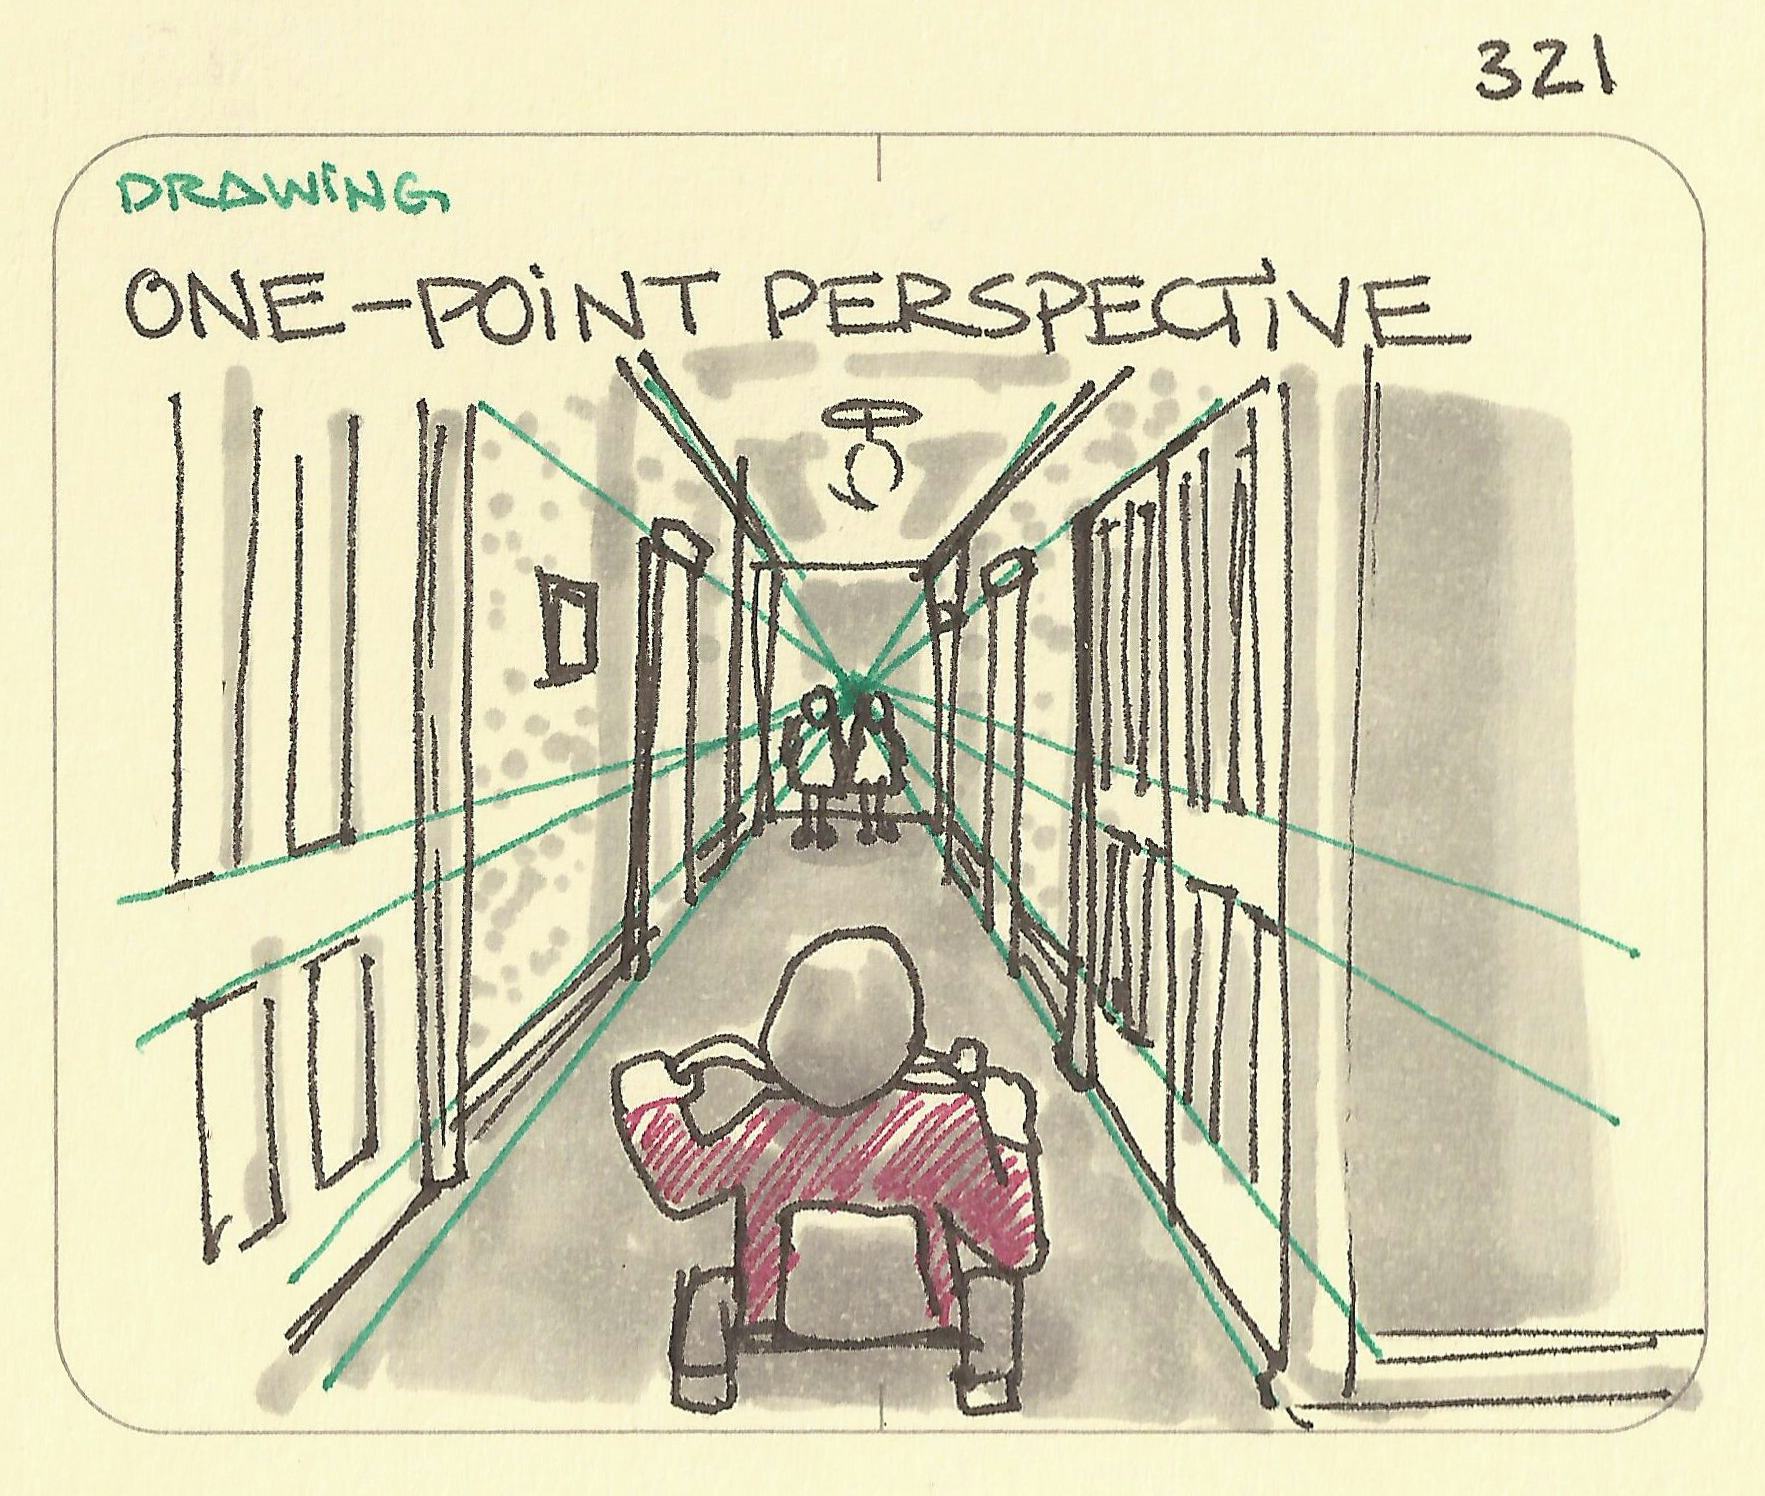 One-point perspective illustration: from Stanley Kubrick's The Shining